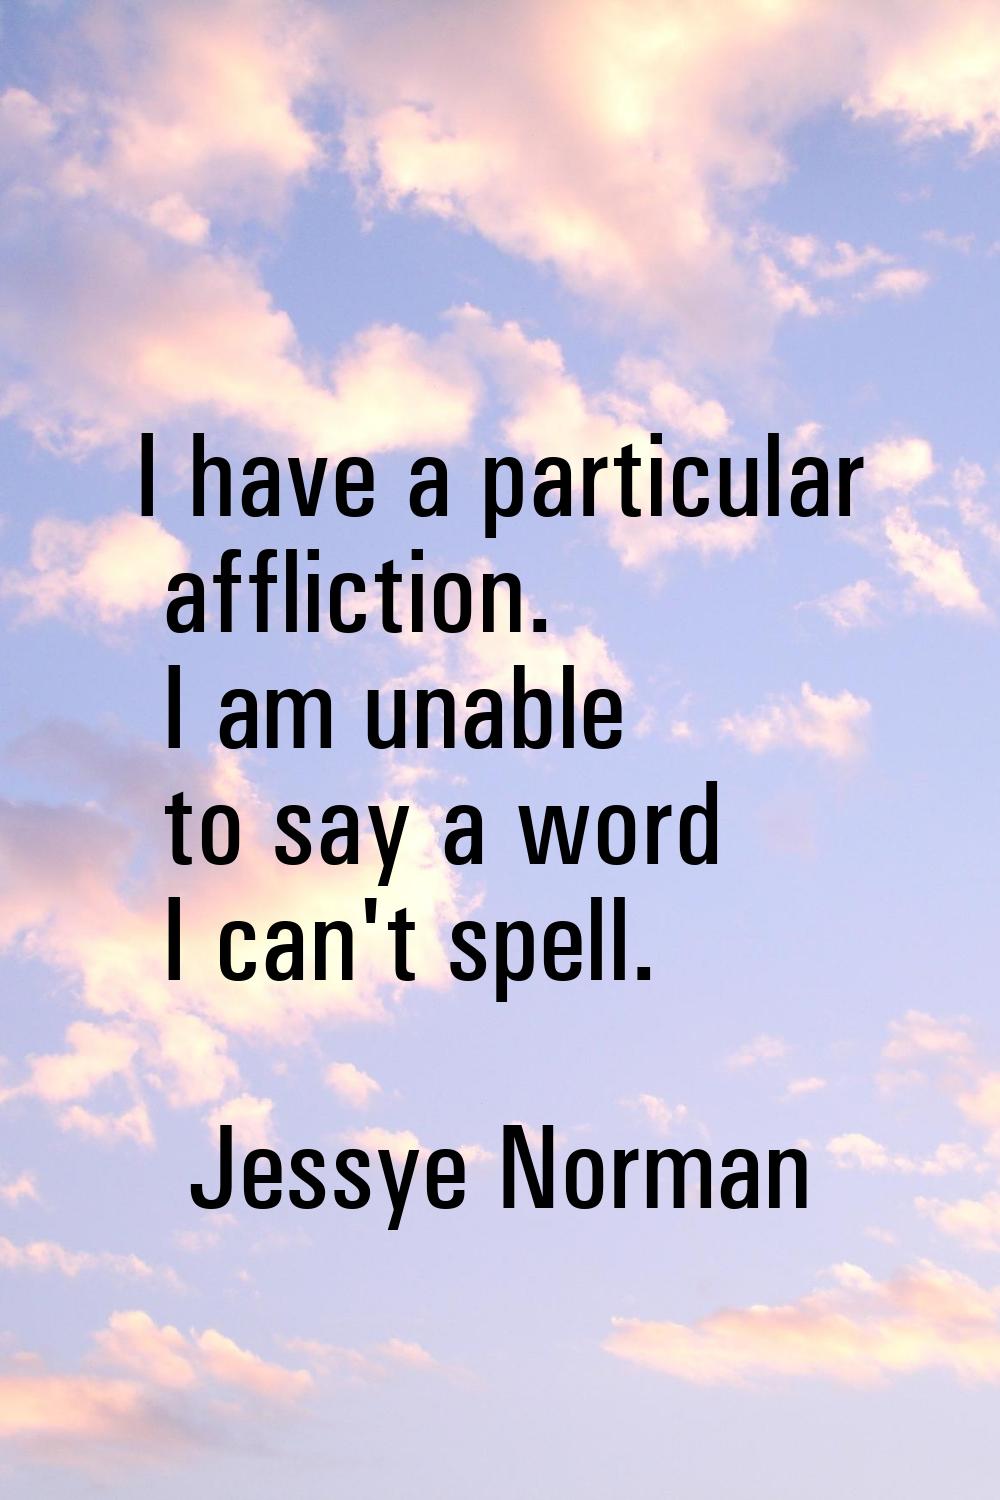 I have a particular affliction. I am unable to say a word I can't spell.